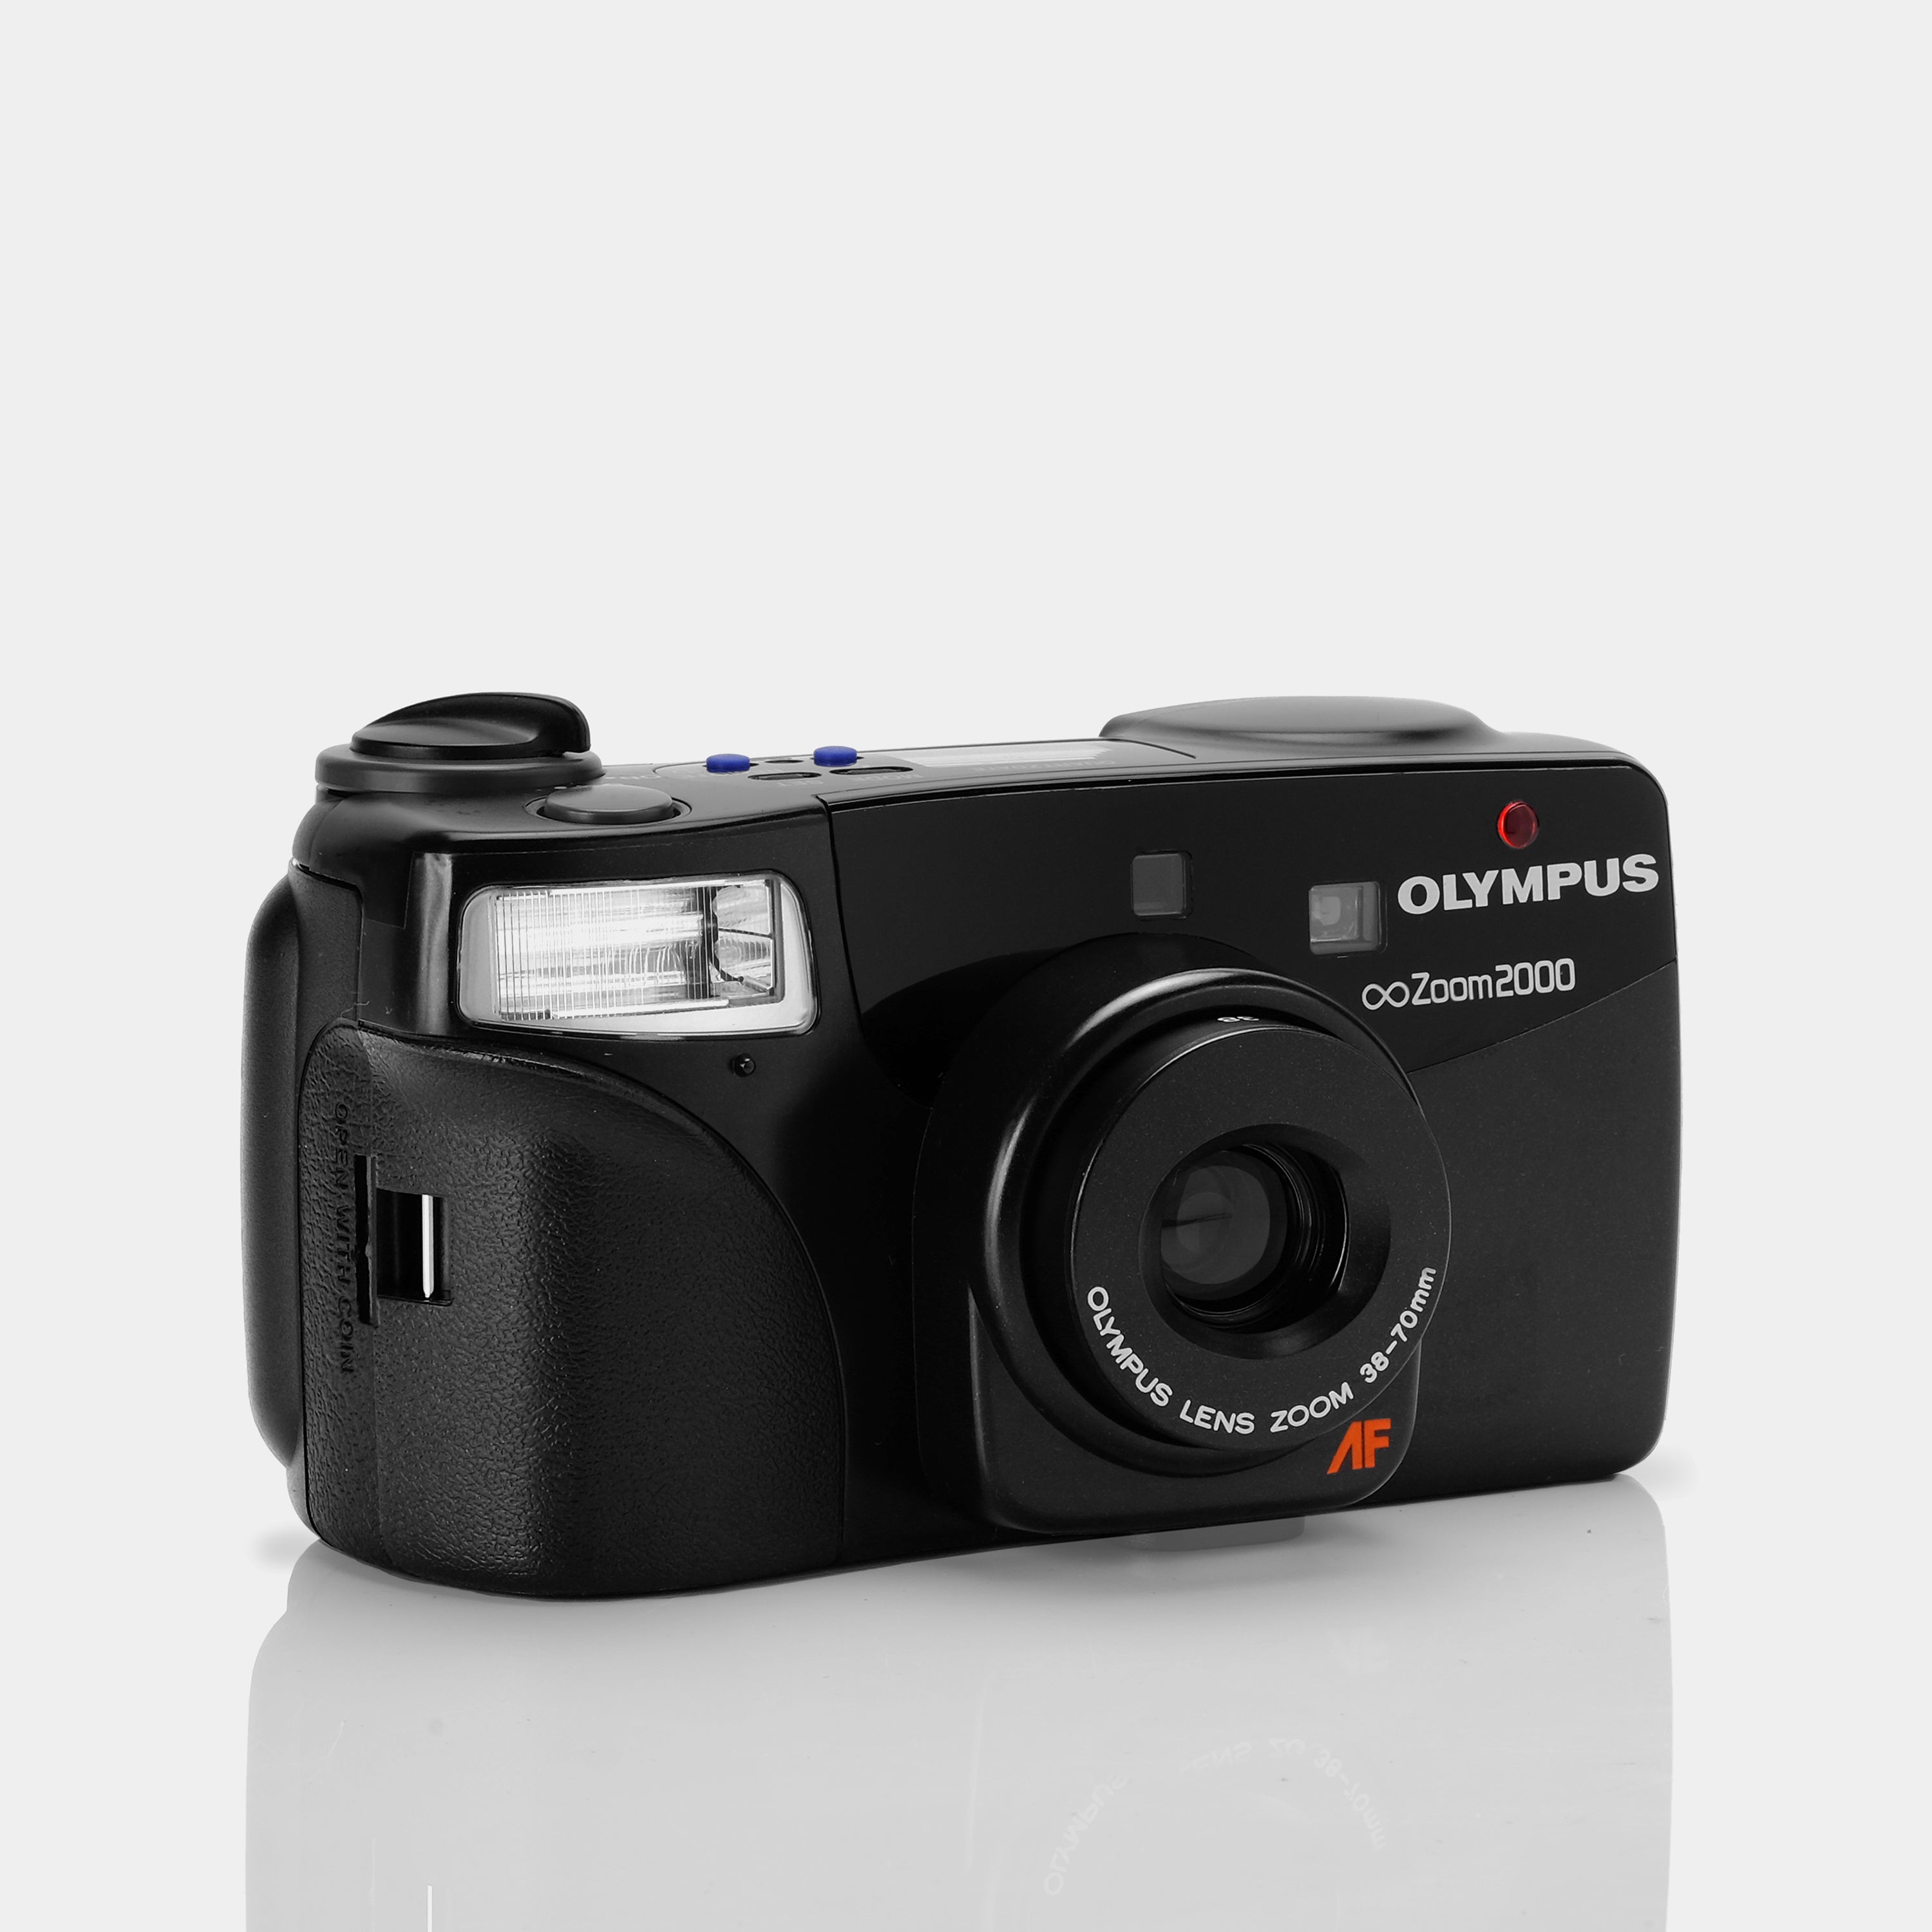 Olympus ∞ Infinity Zoom 2000 35mm Point and Shoot Film Camera